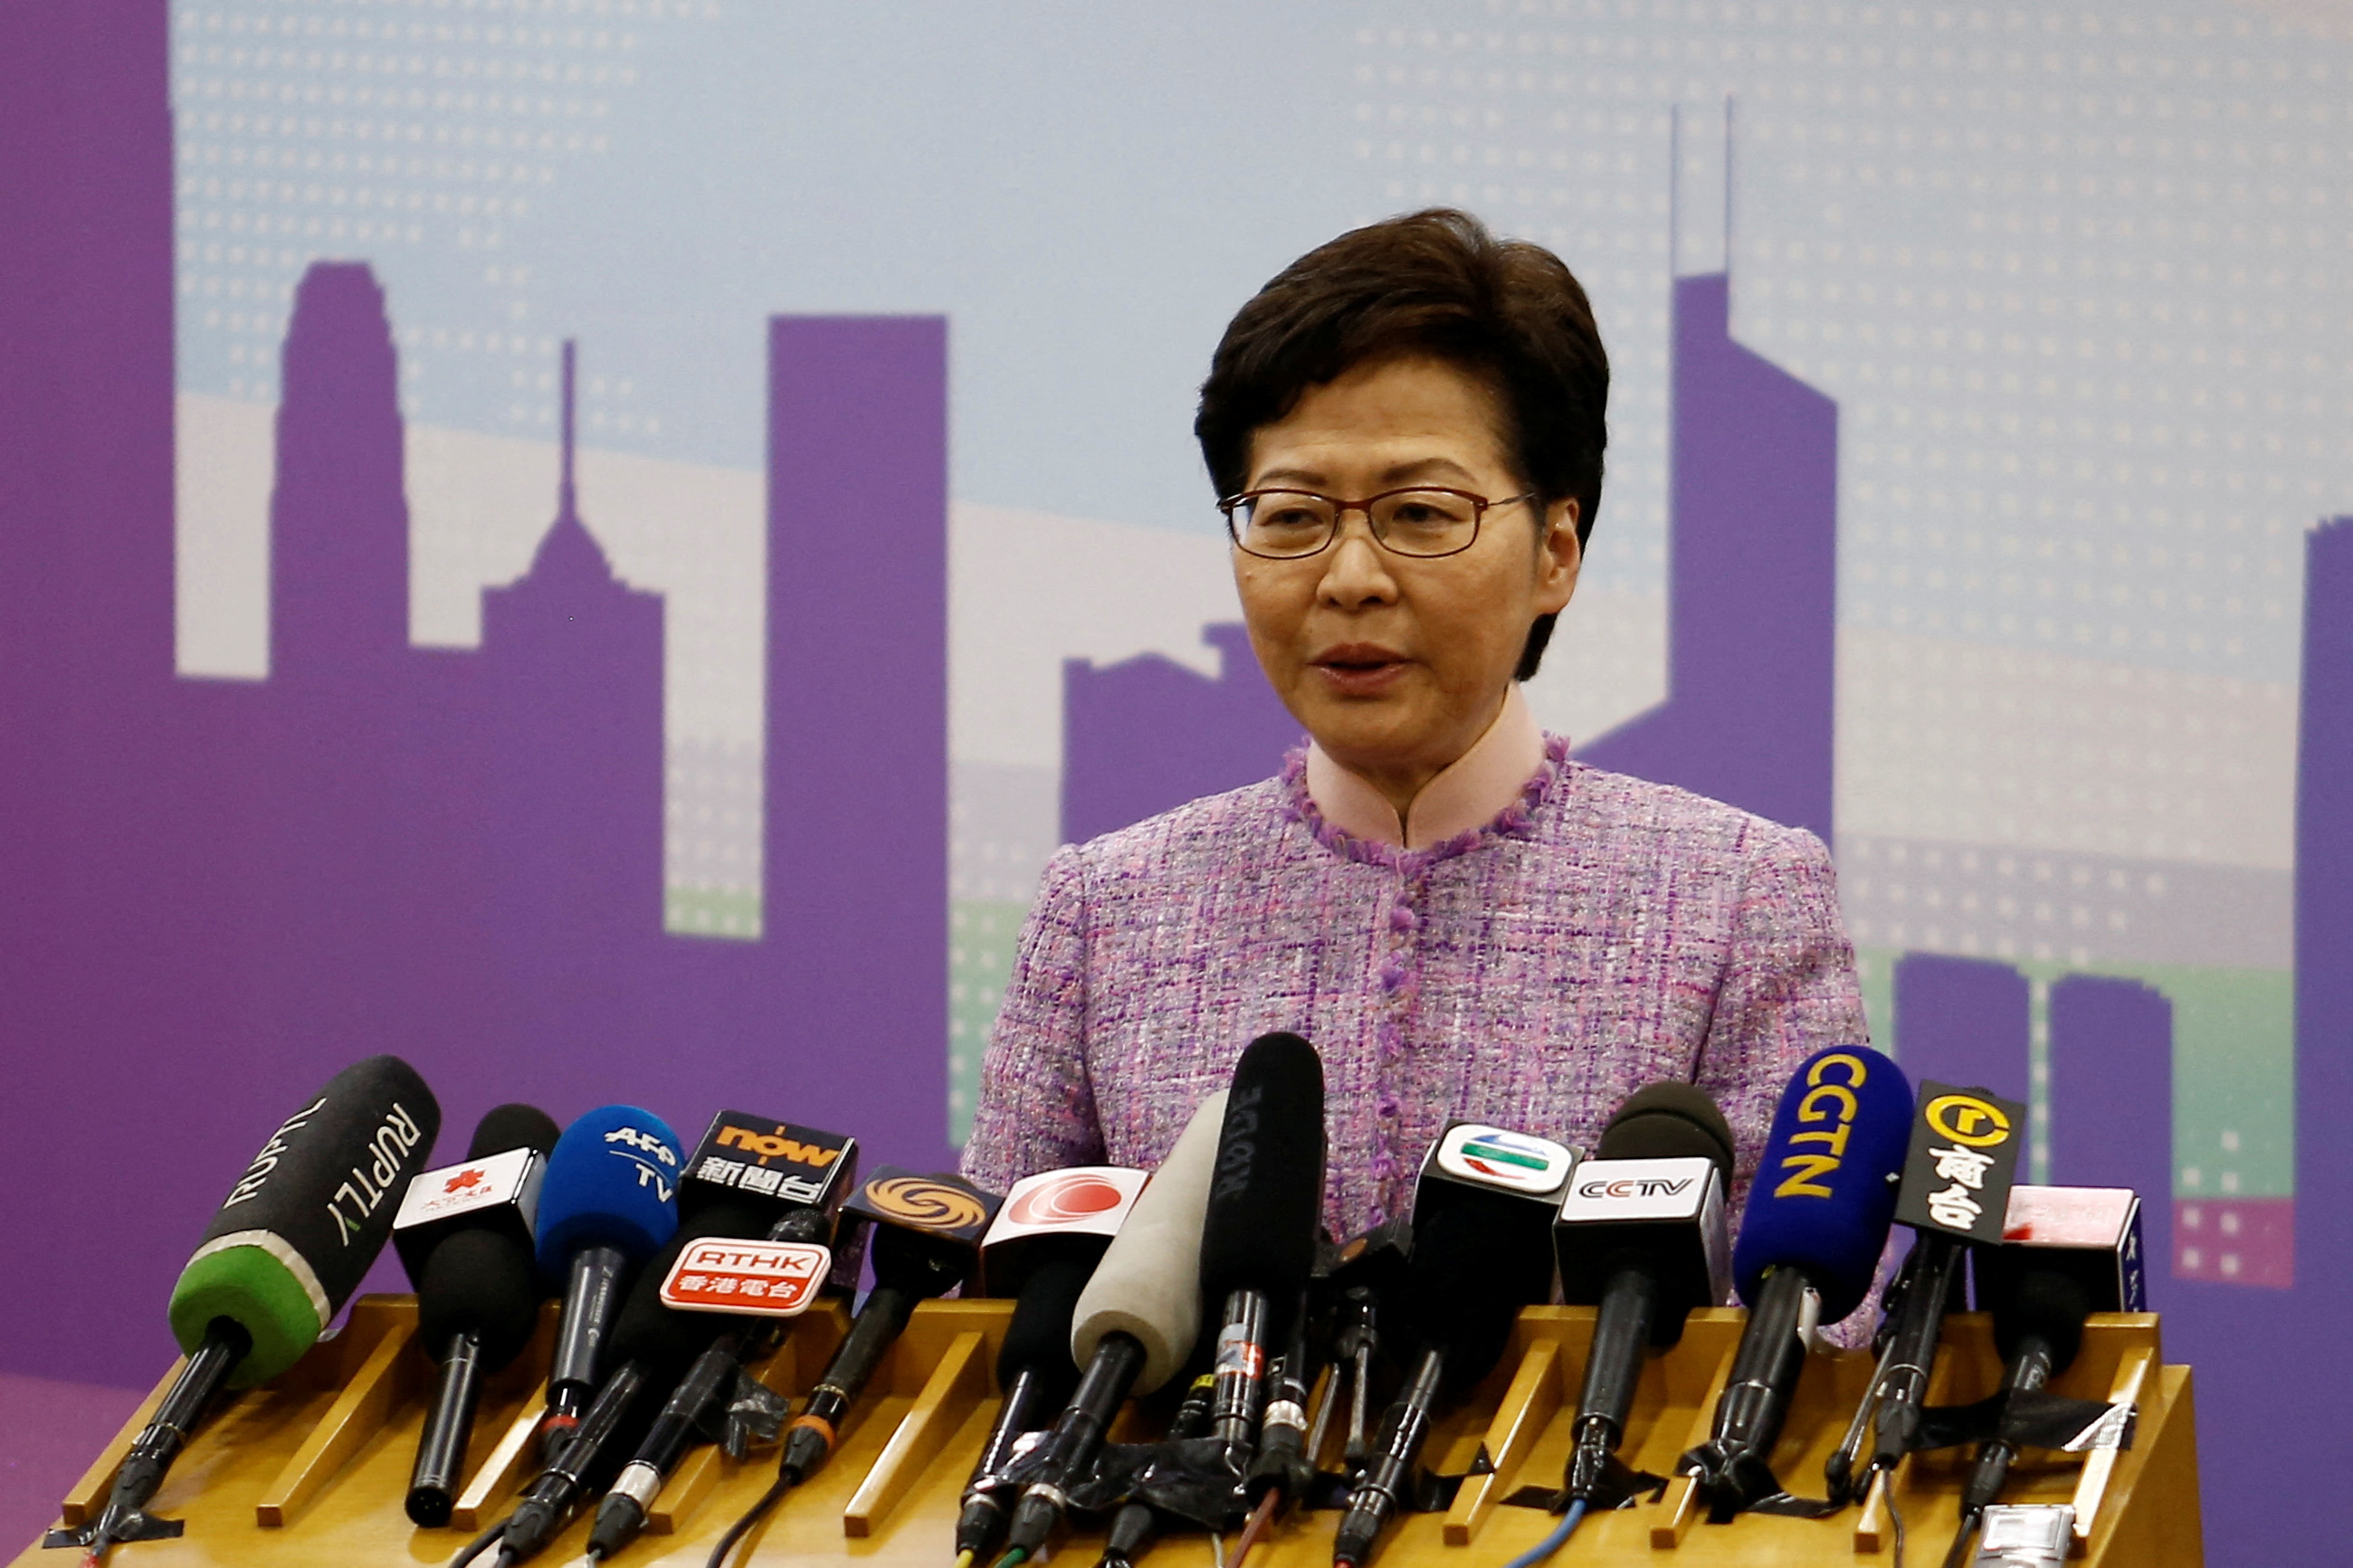 Hong Kong Chief Executive Carrie Lam speaks at a news conference in Beijing